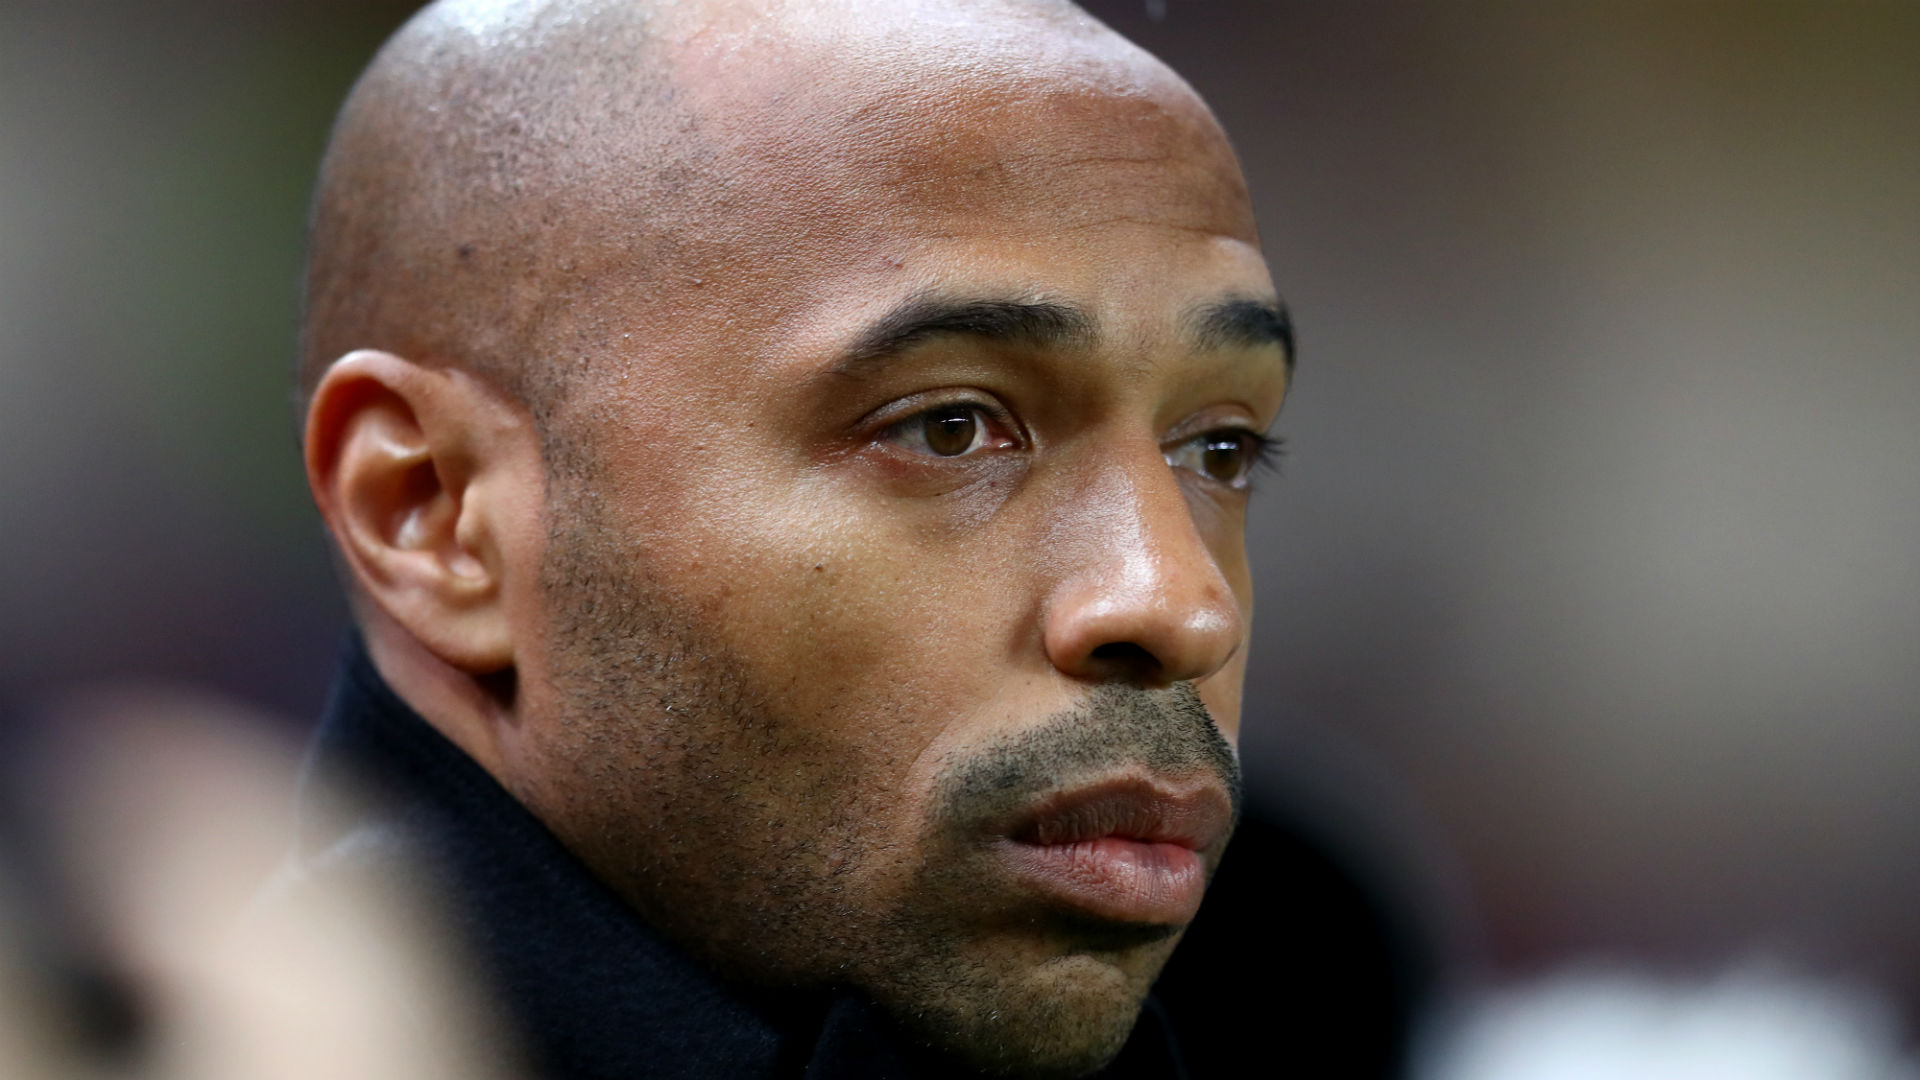 With Monaco still struggling, Thierry Henry said a decision on his future was in the owners' hands.